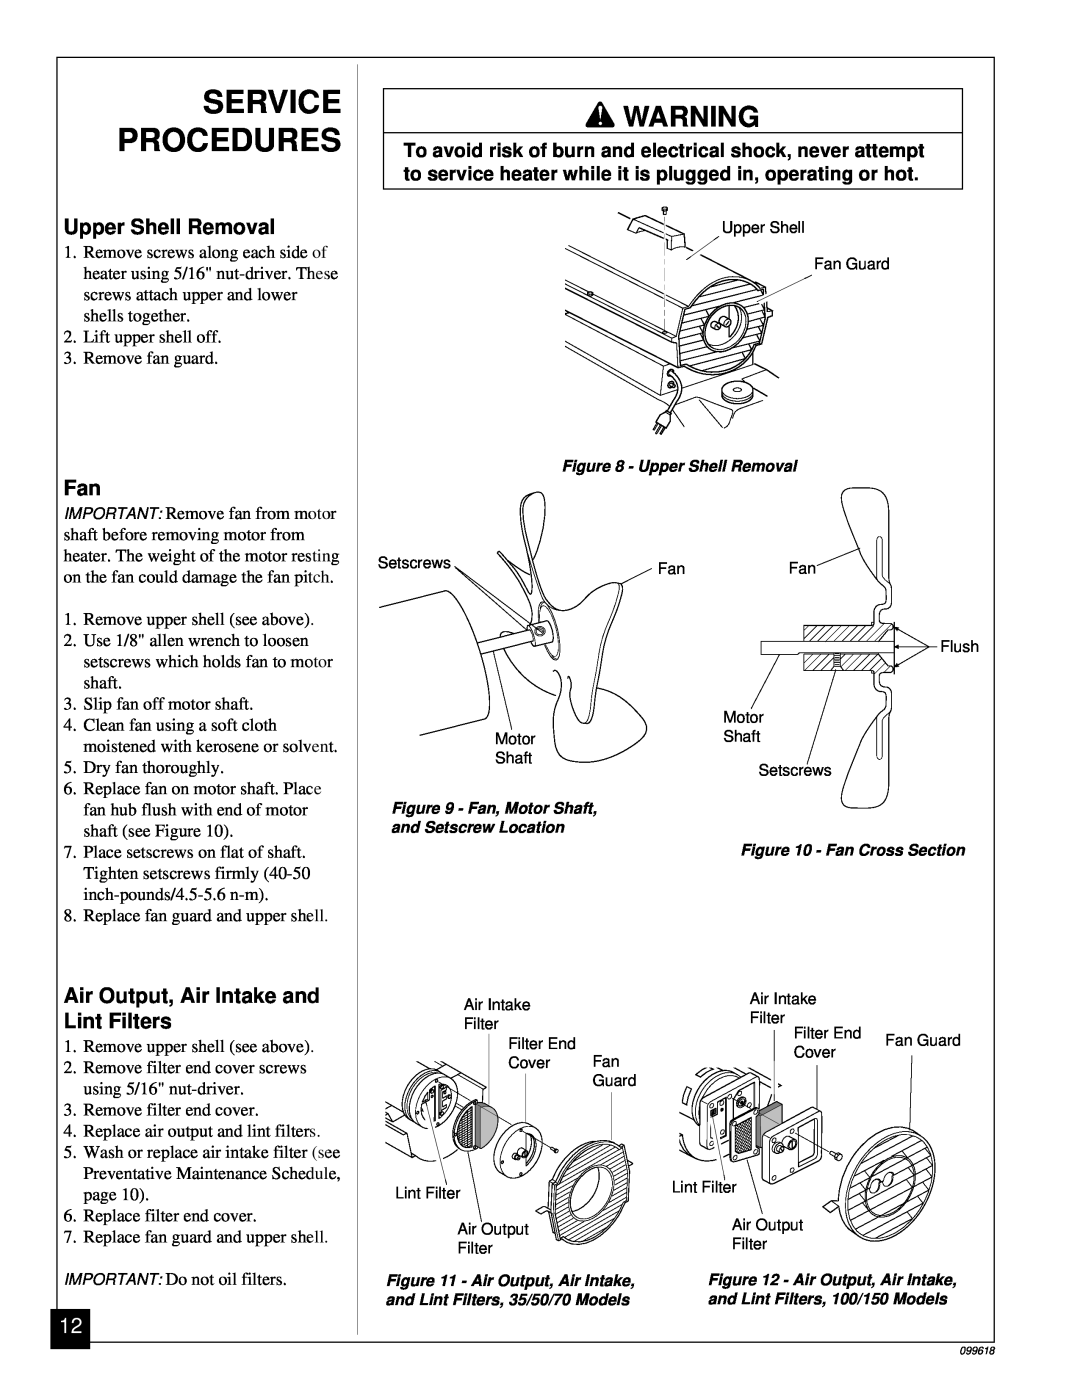 Desa 50 owner manual Service, Procedures, IMPORTANT Remove fan from motor, shaft before removing motor from 